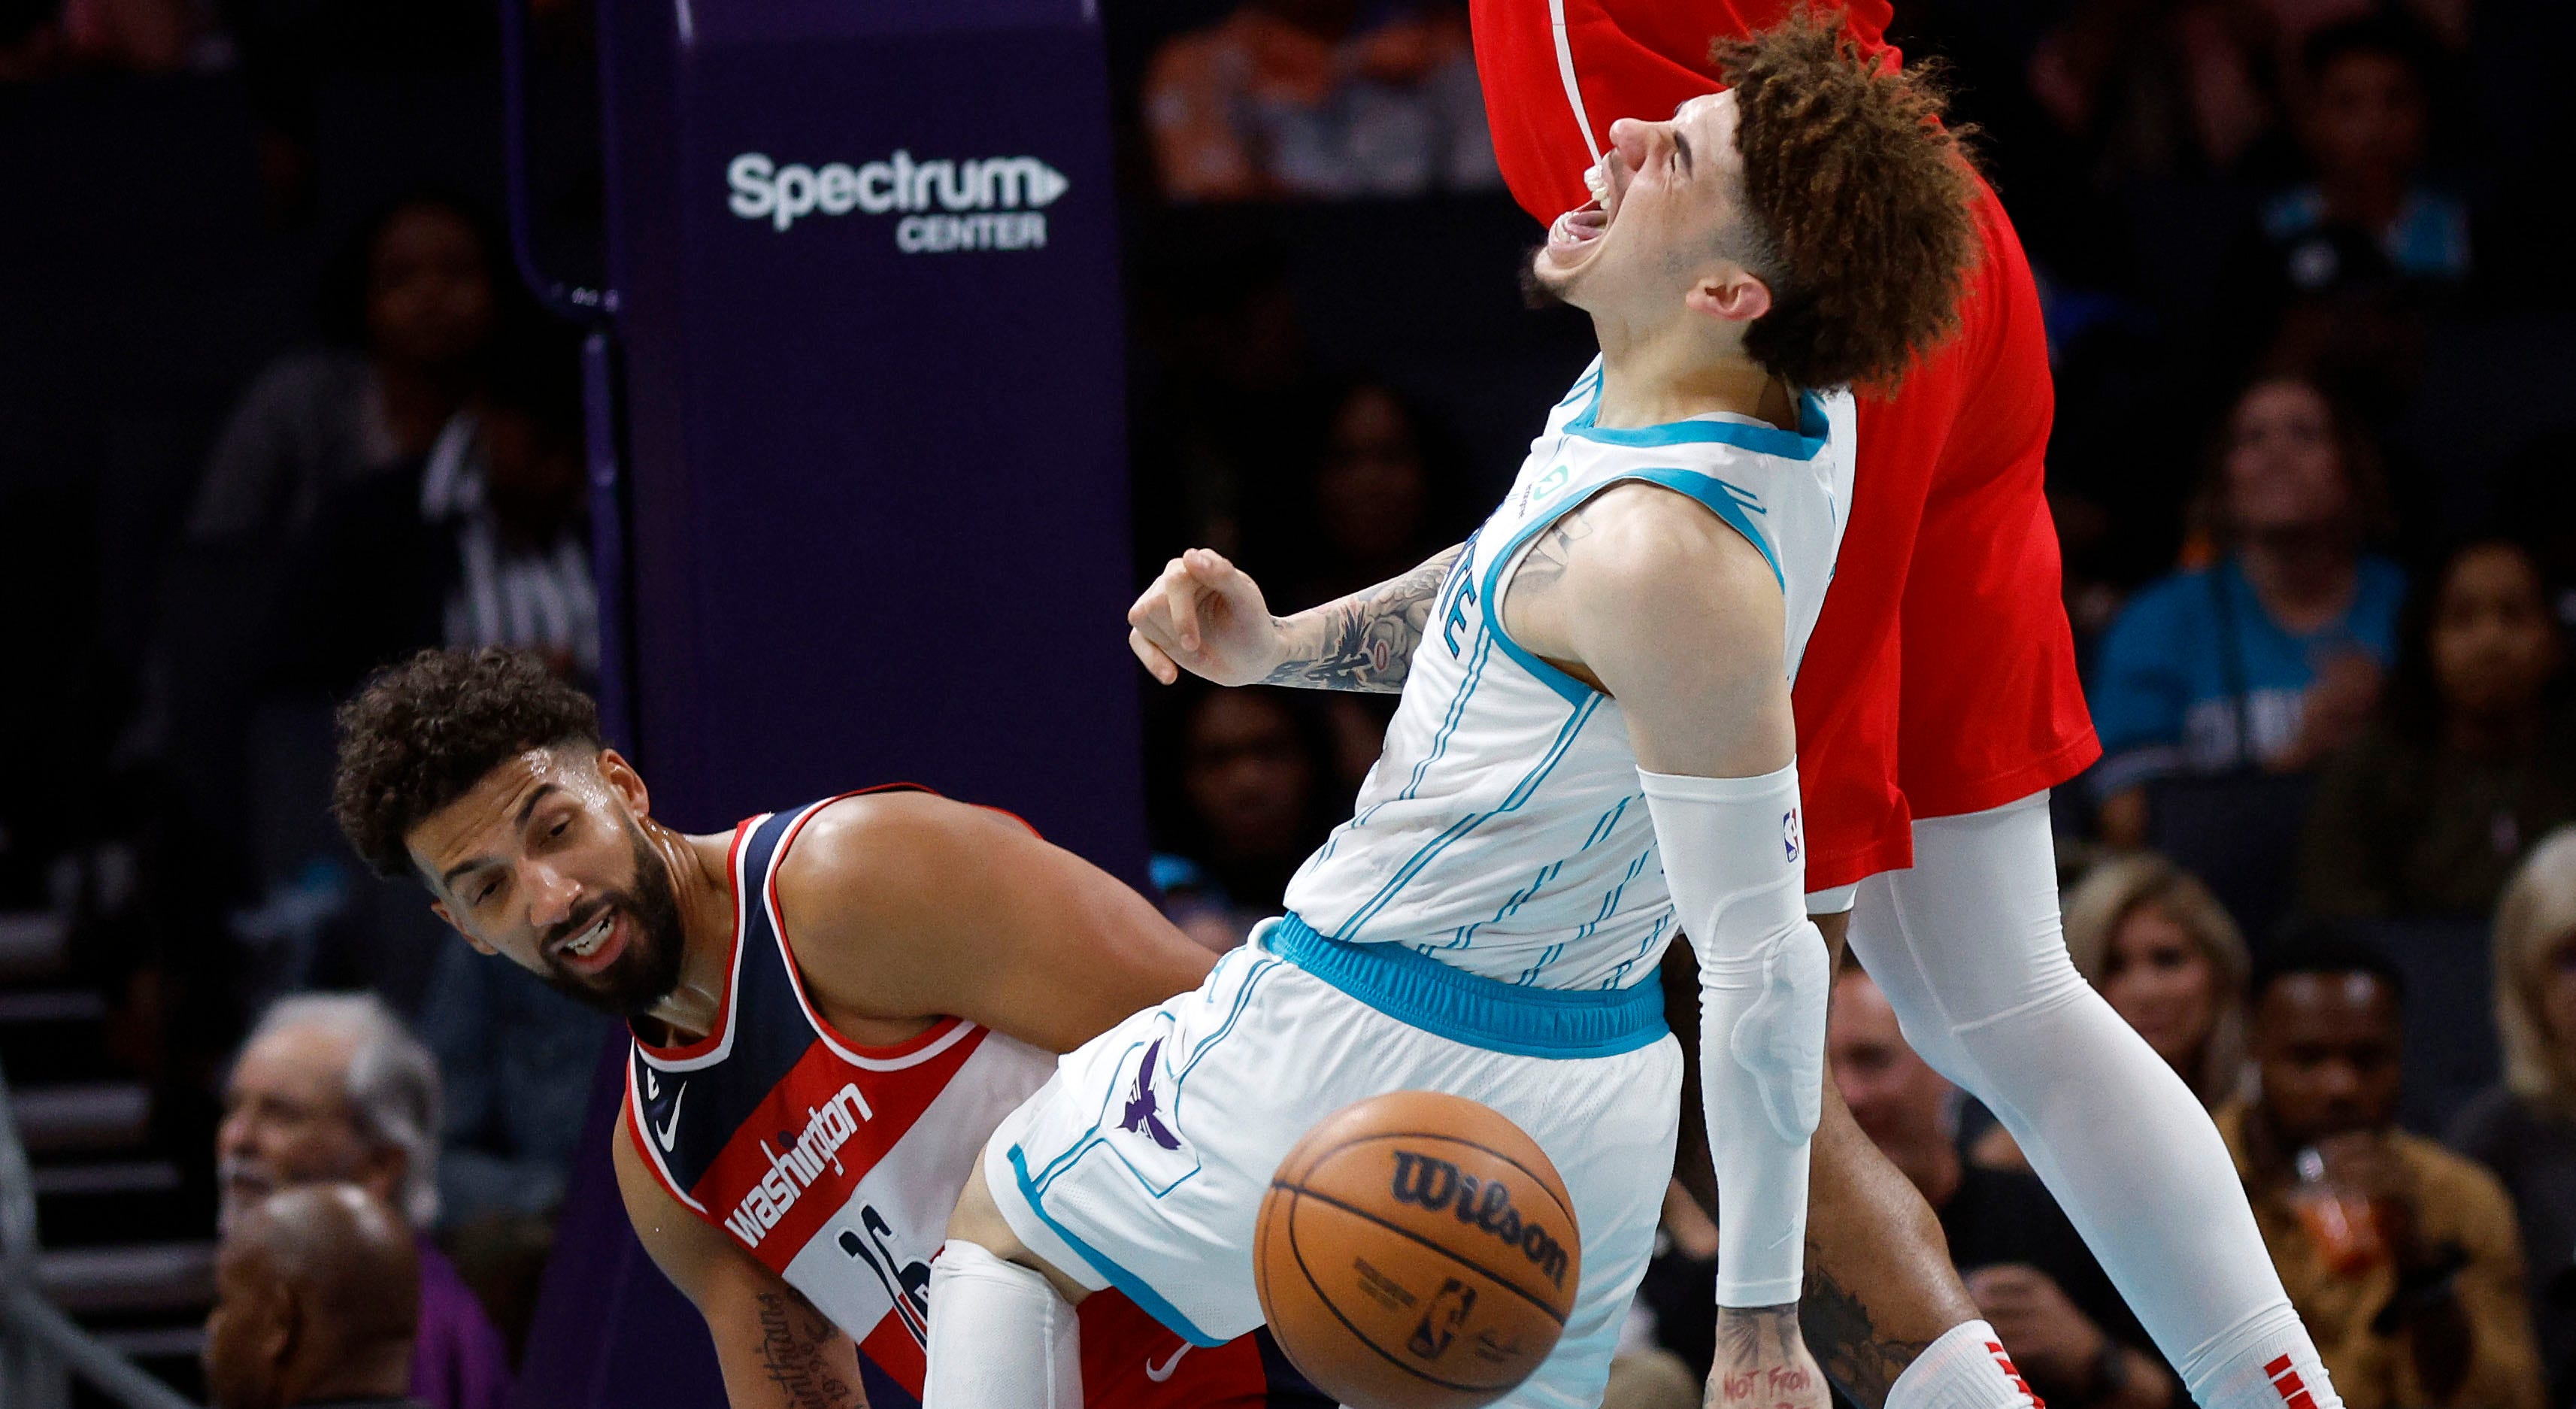 Hornets star LaMelo Ball fractures right ankle in non-contact play